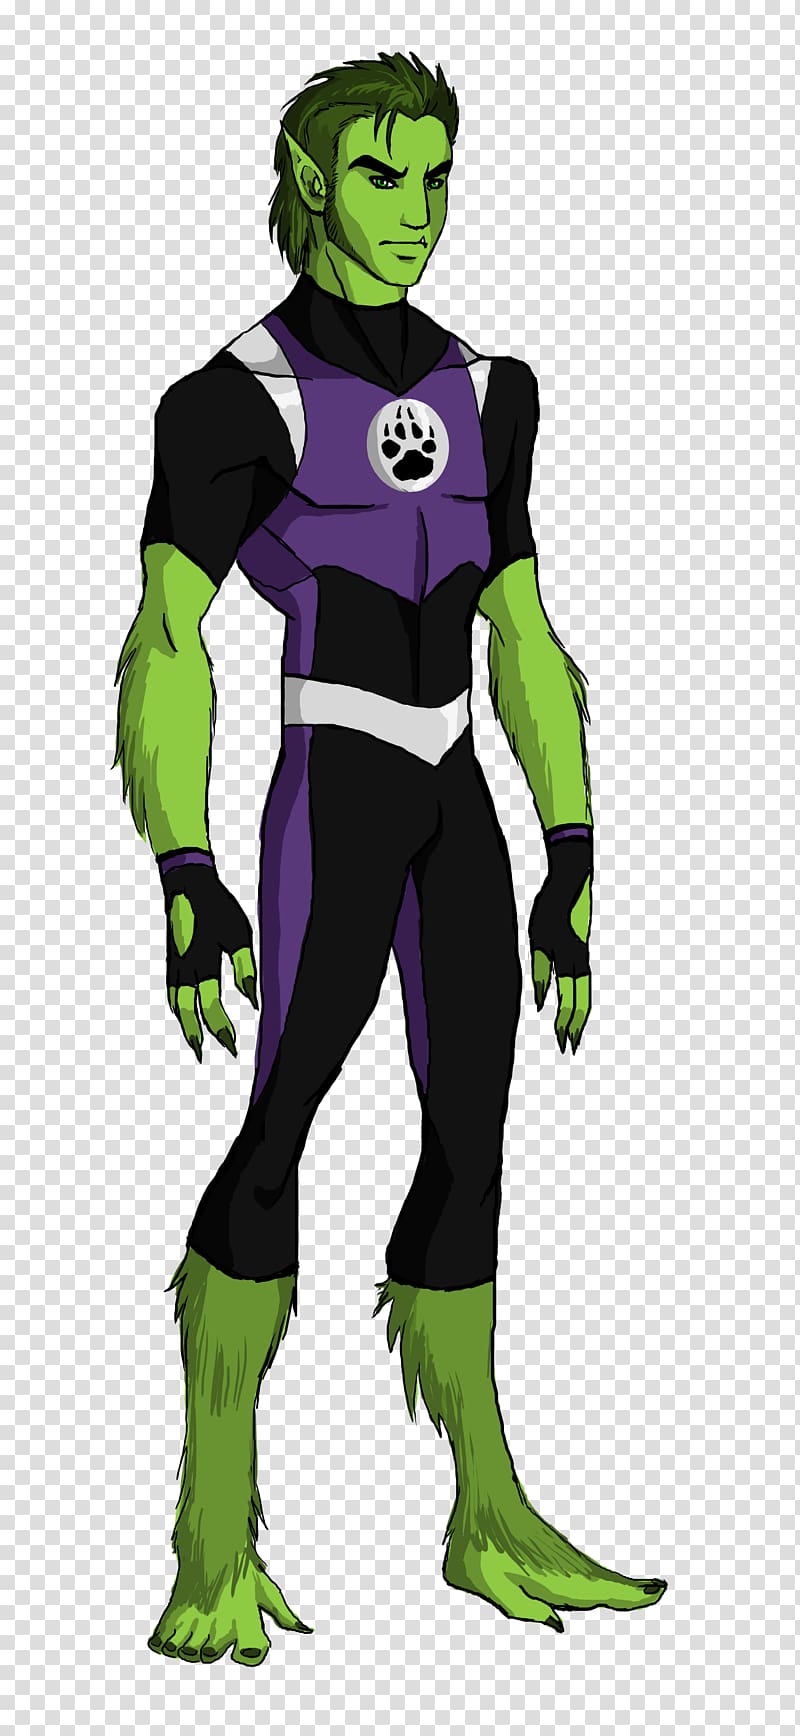 Beast Boy Injustice: Gods Among Us Raven Young Justice, Beast Boy Pic transparent background PNG clipart